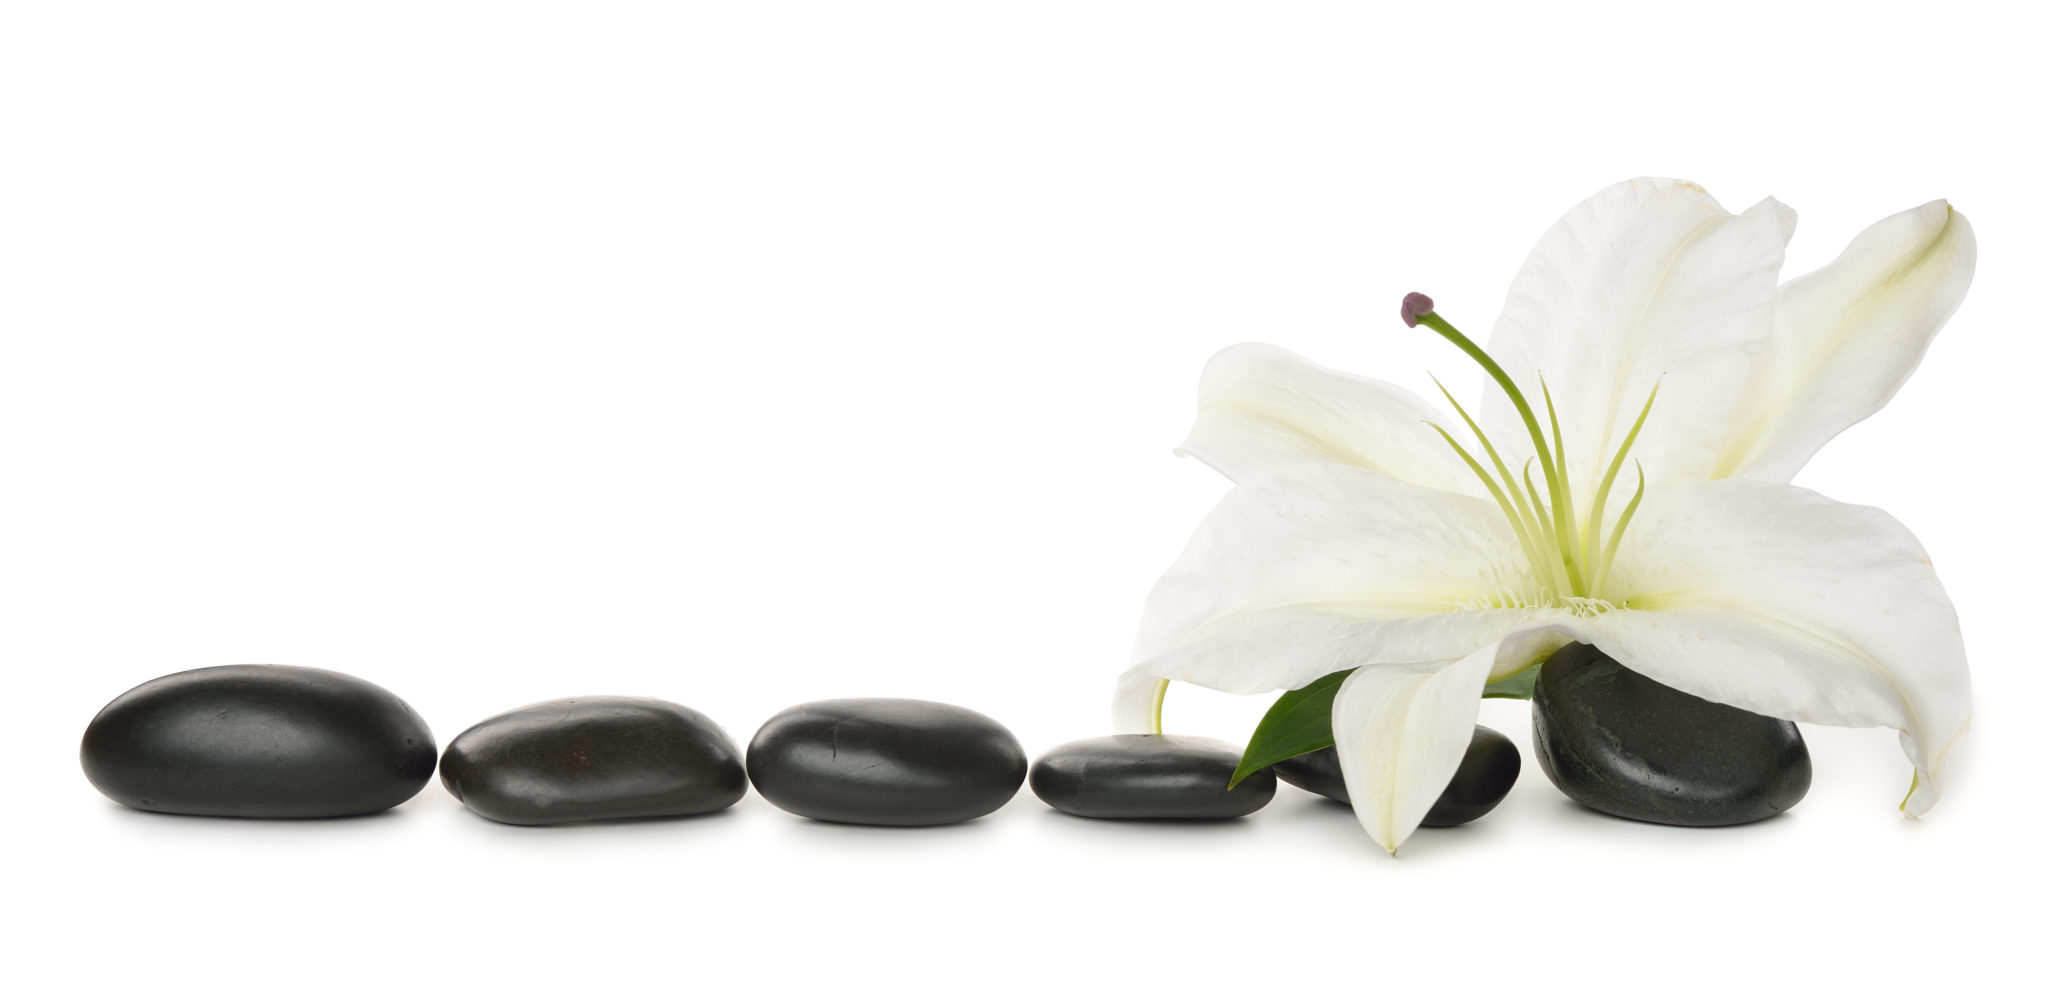 Six smooth pebbles in a horizontal line and a white lily at the right end